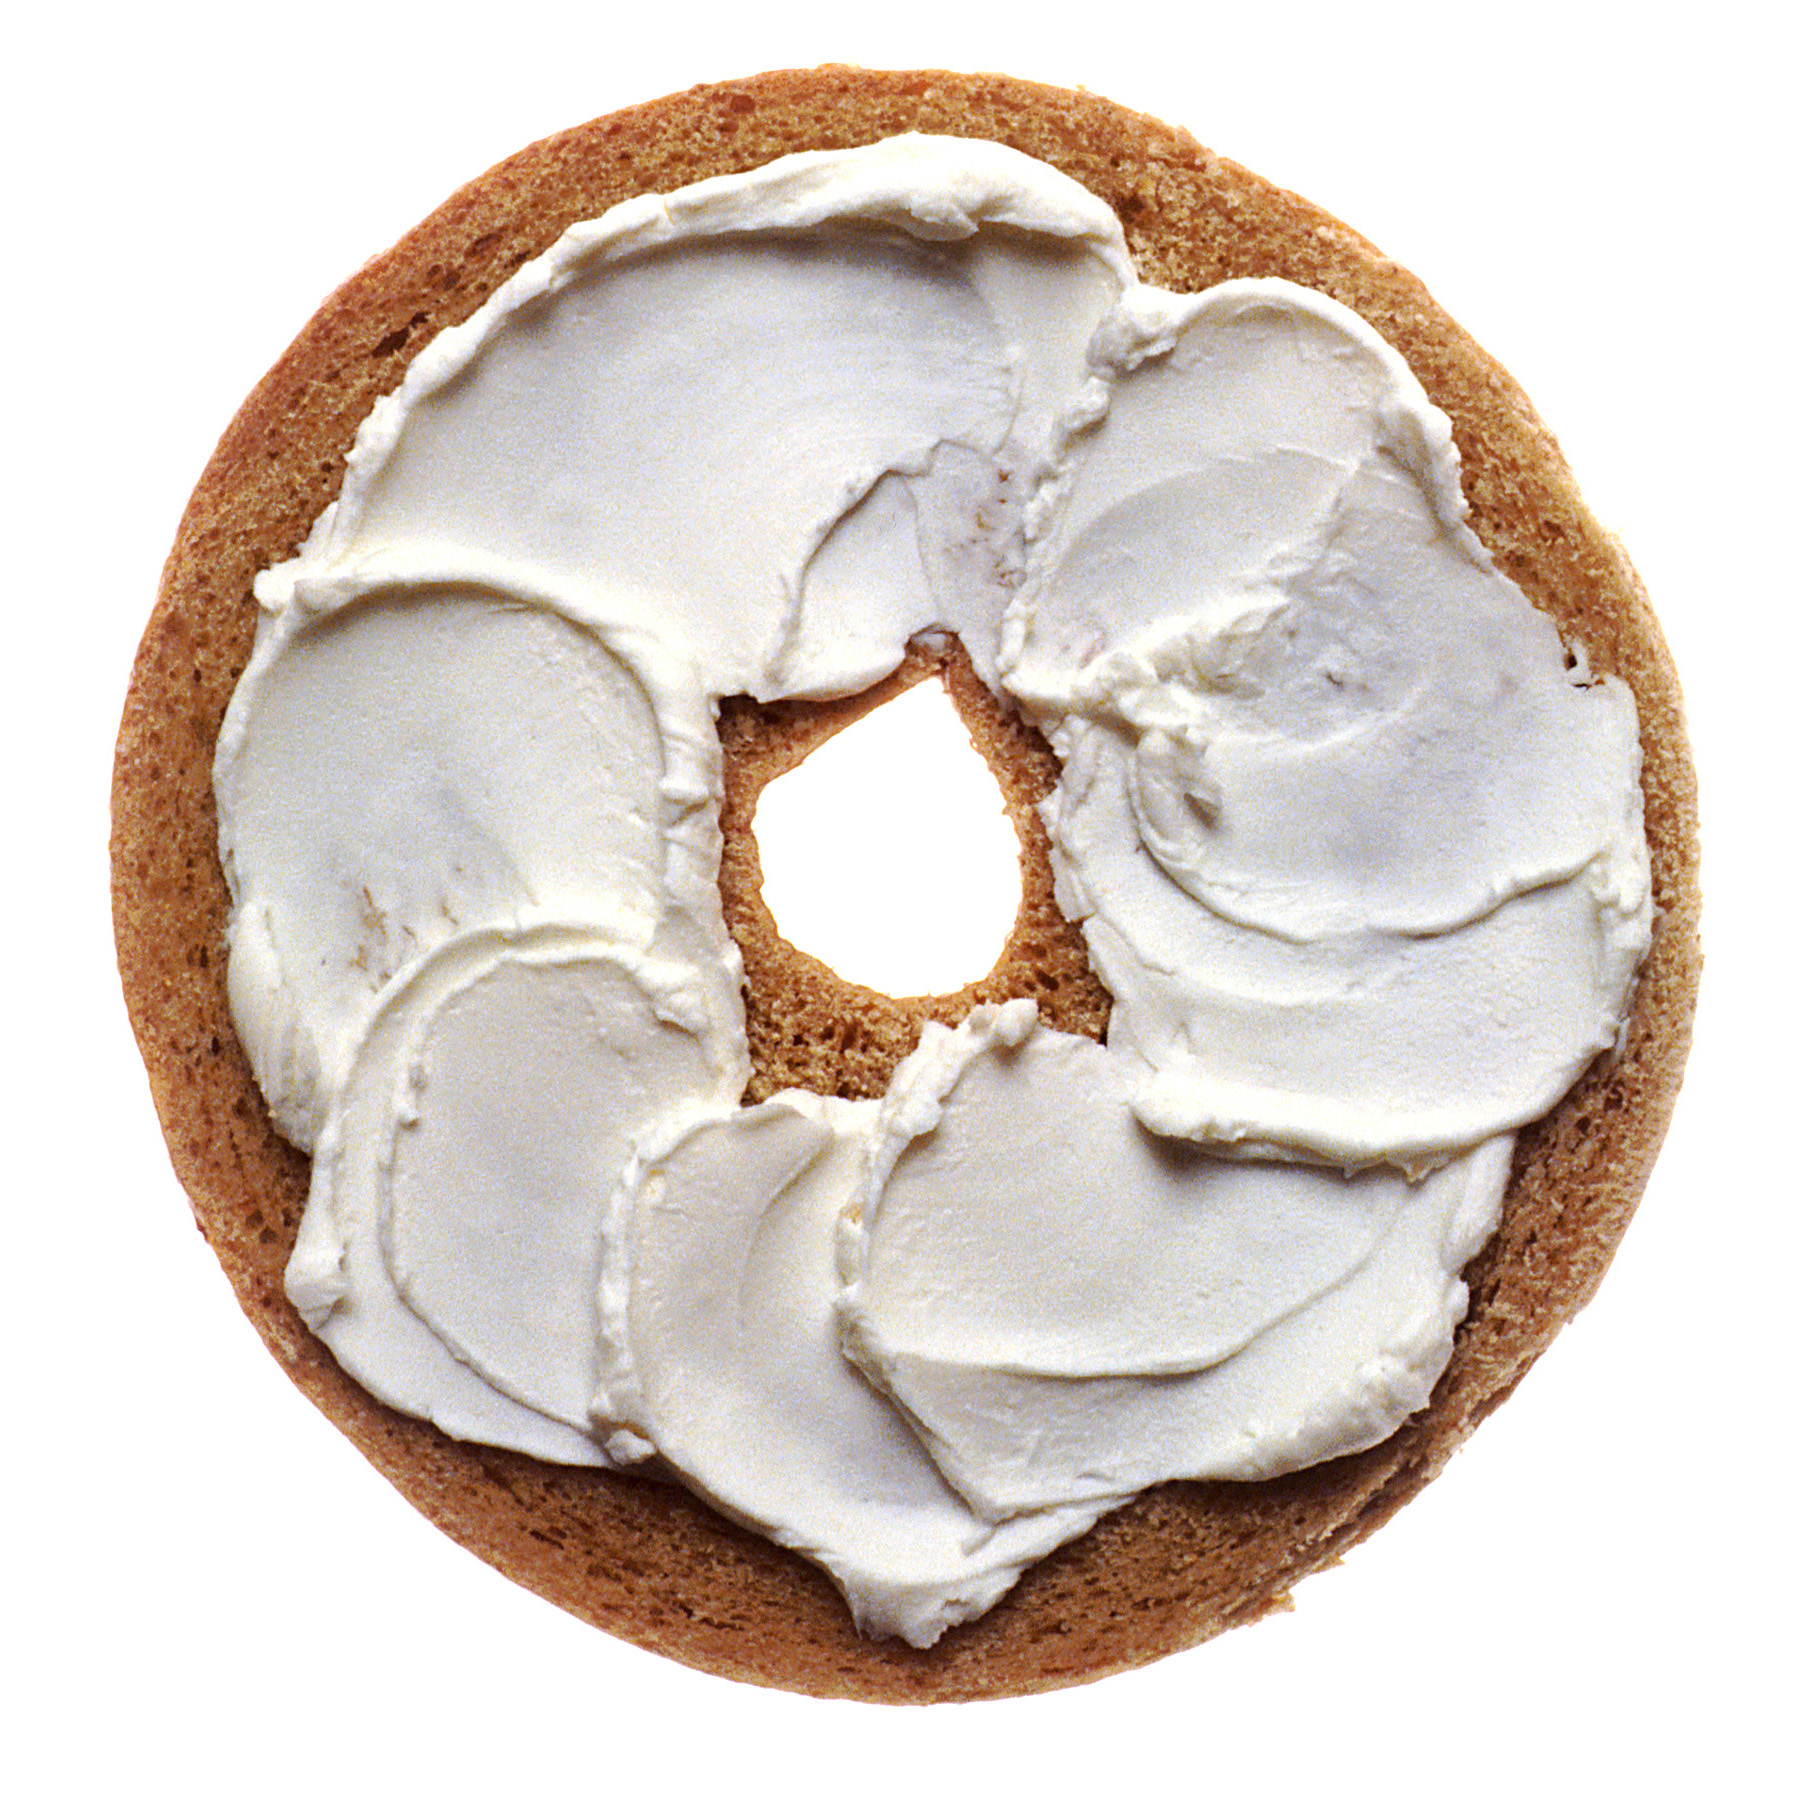 Bagel (With Cream Cheese)